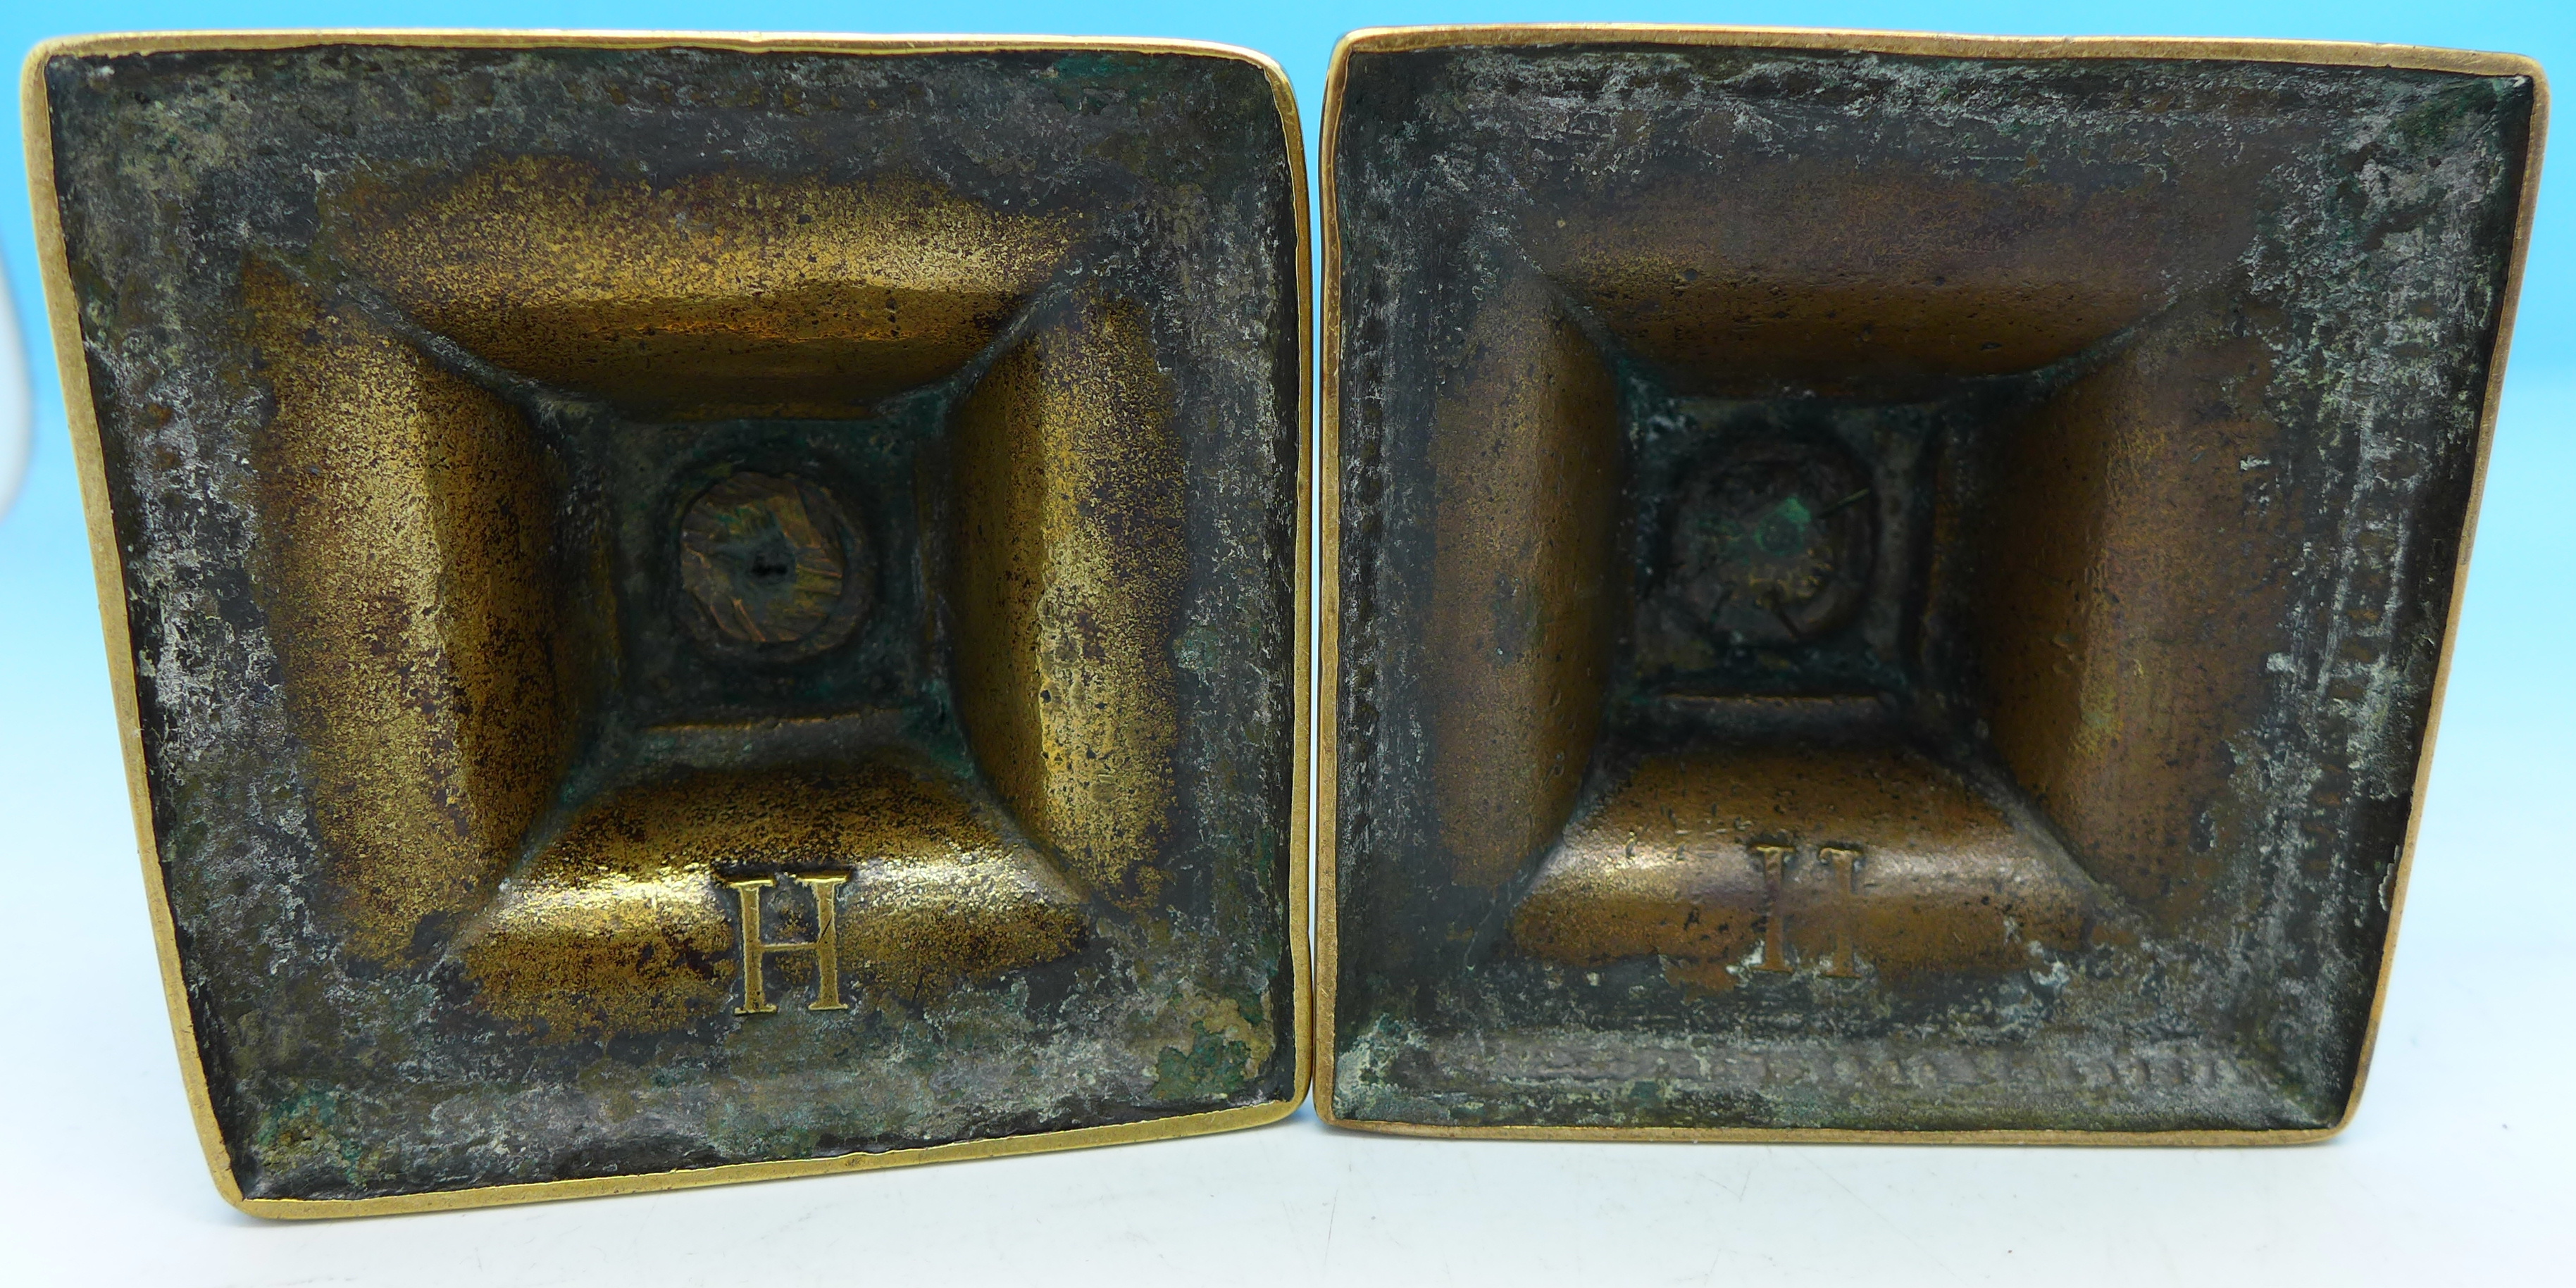 A pair of 19th Century patent brass candlesticks - Image 2 of 2